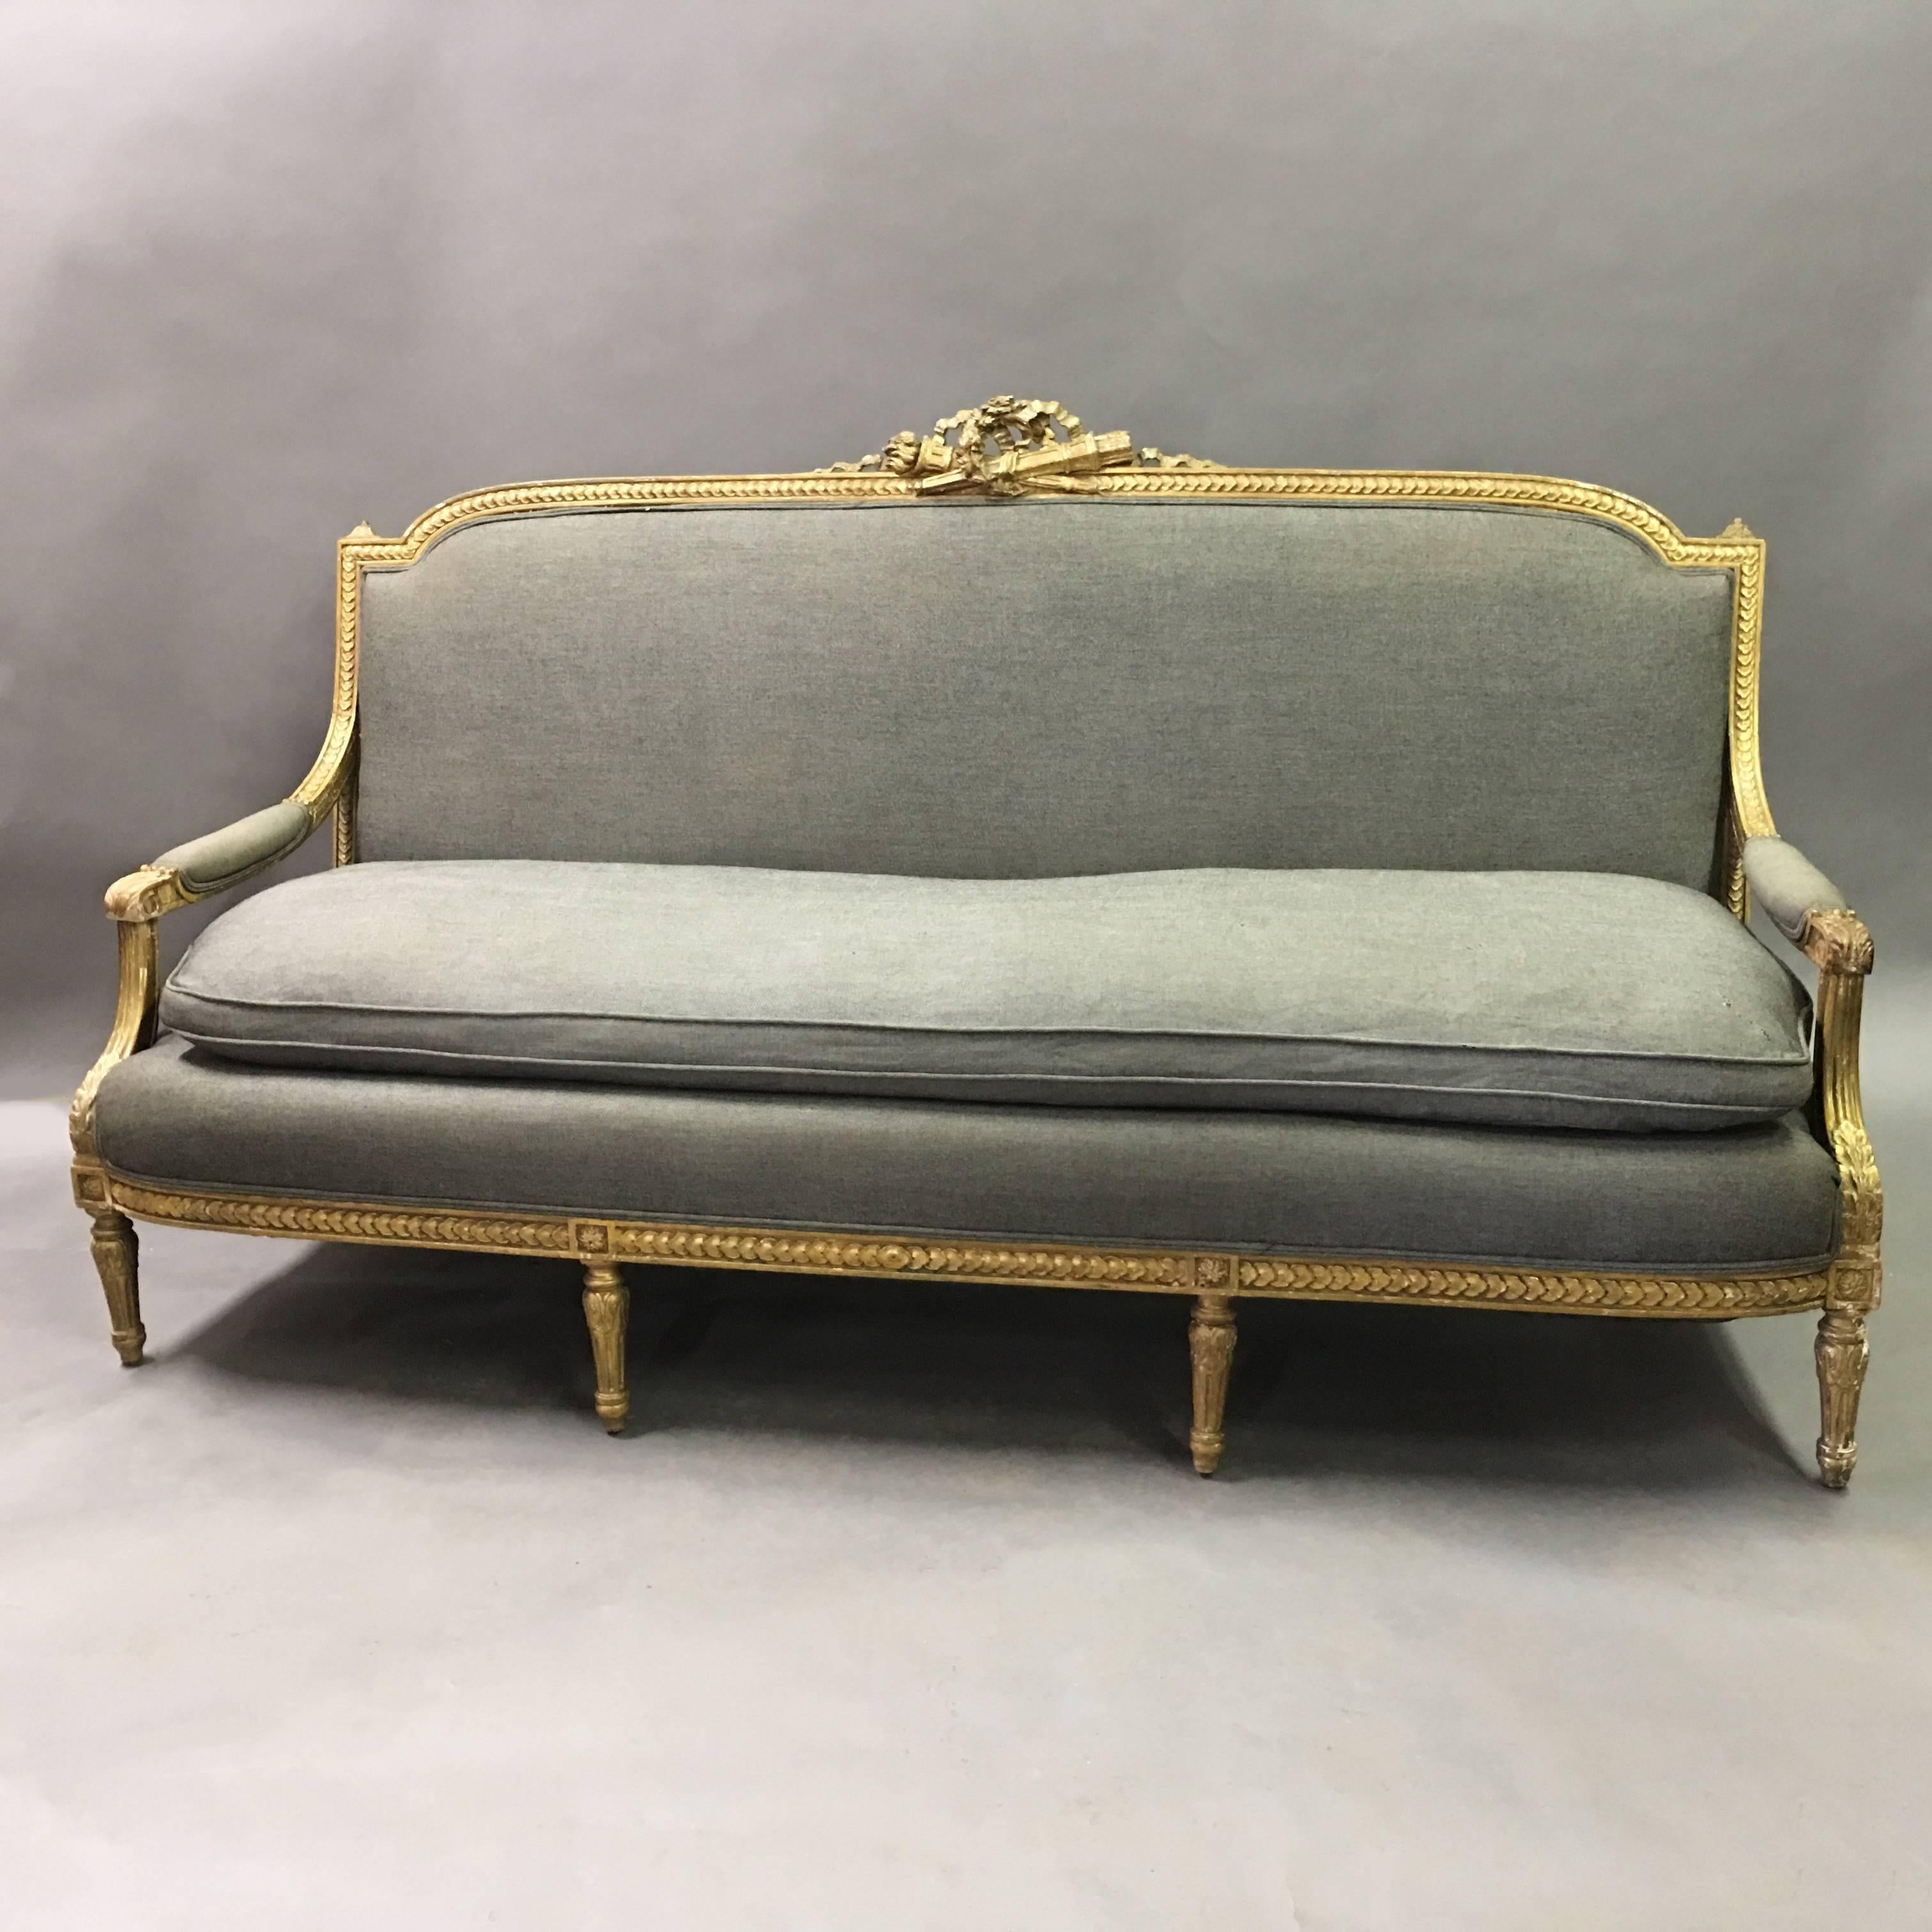 Antique, Louis XVI style, sofa, circa early 1900s features a wonderfully patinated, carved ribbon and wreath motif, giltwood frame with it's original gray wool upholstery.